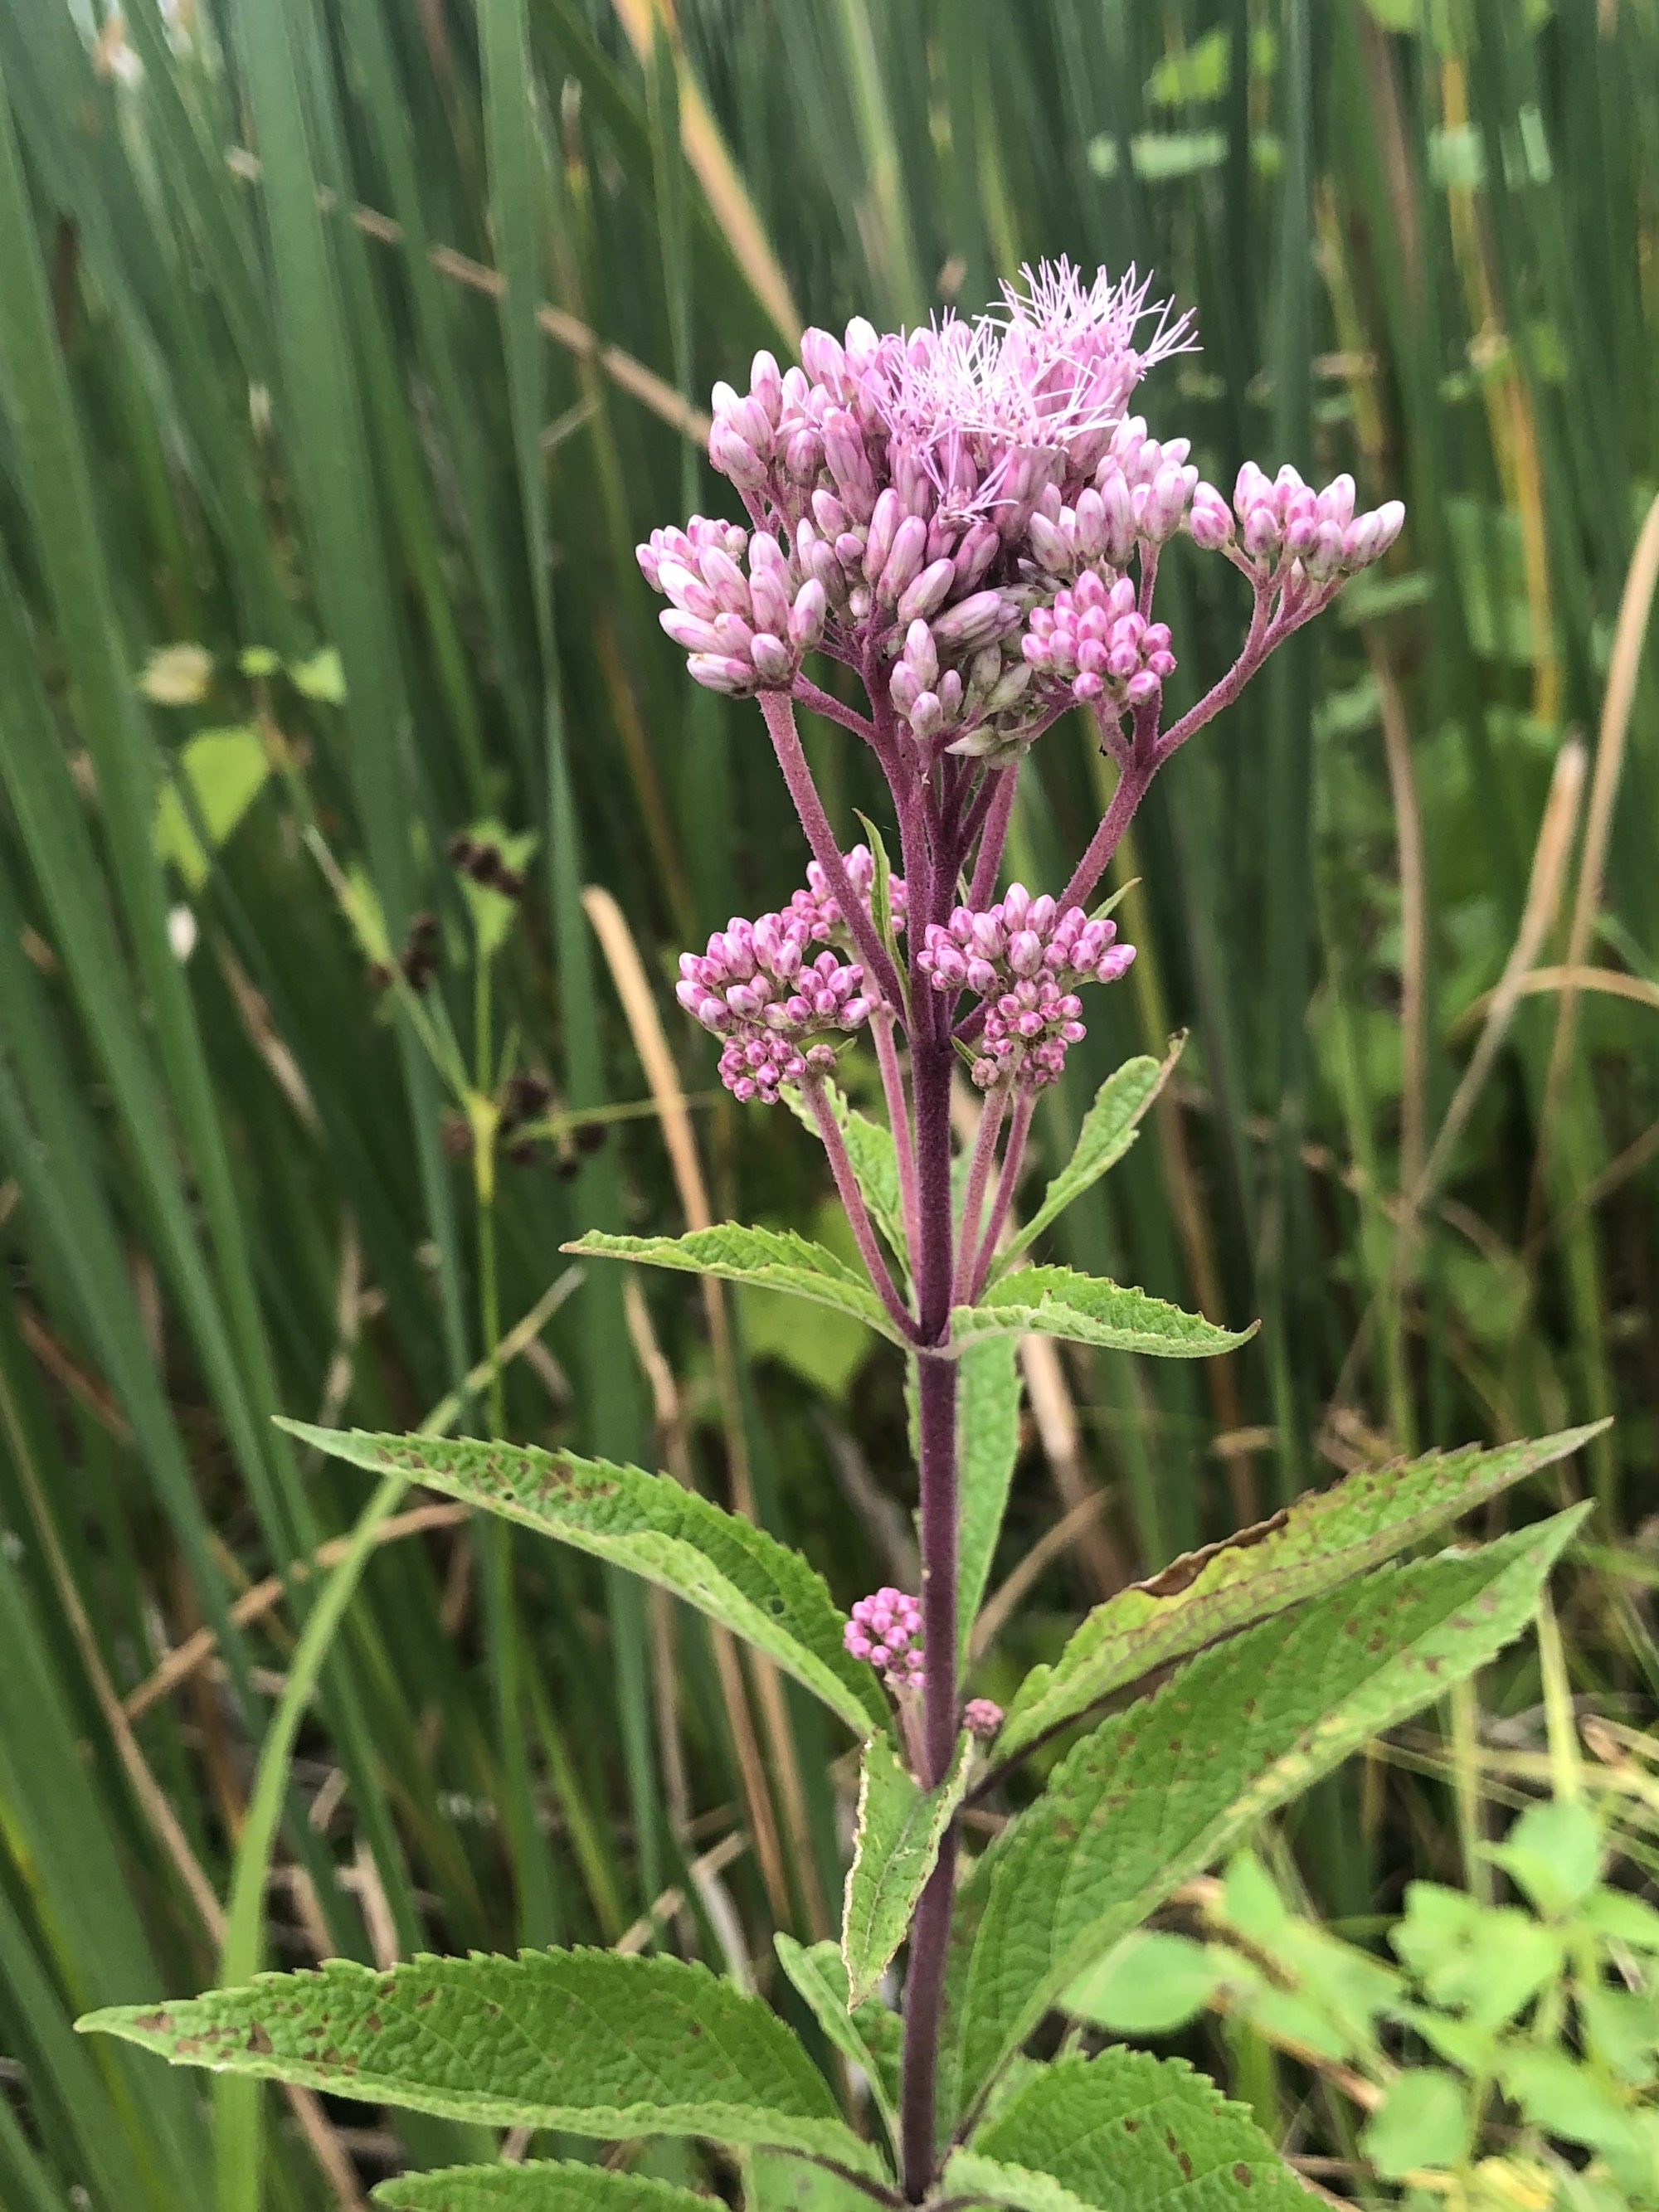 Leaves of Spotted Joe-Pye Weed along shore of Lake Wingra on Arboretum Drive in Madison, Wisconsin on August 5, 2021.